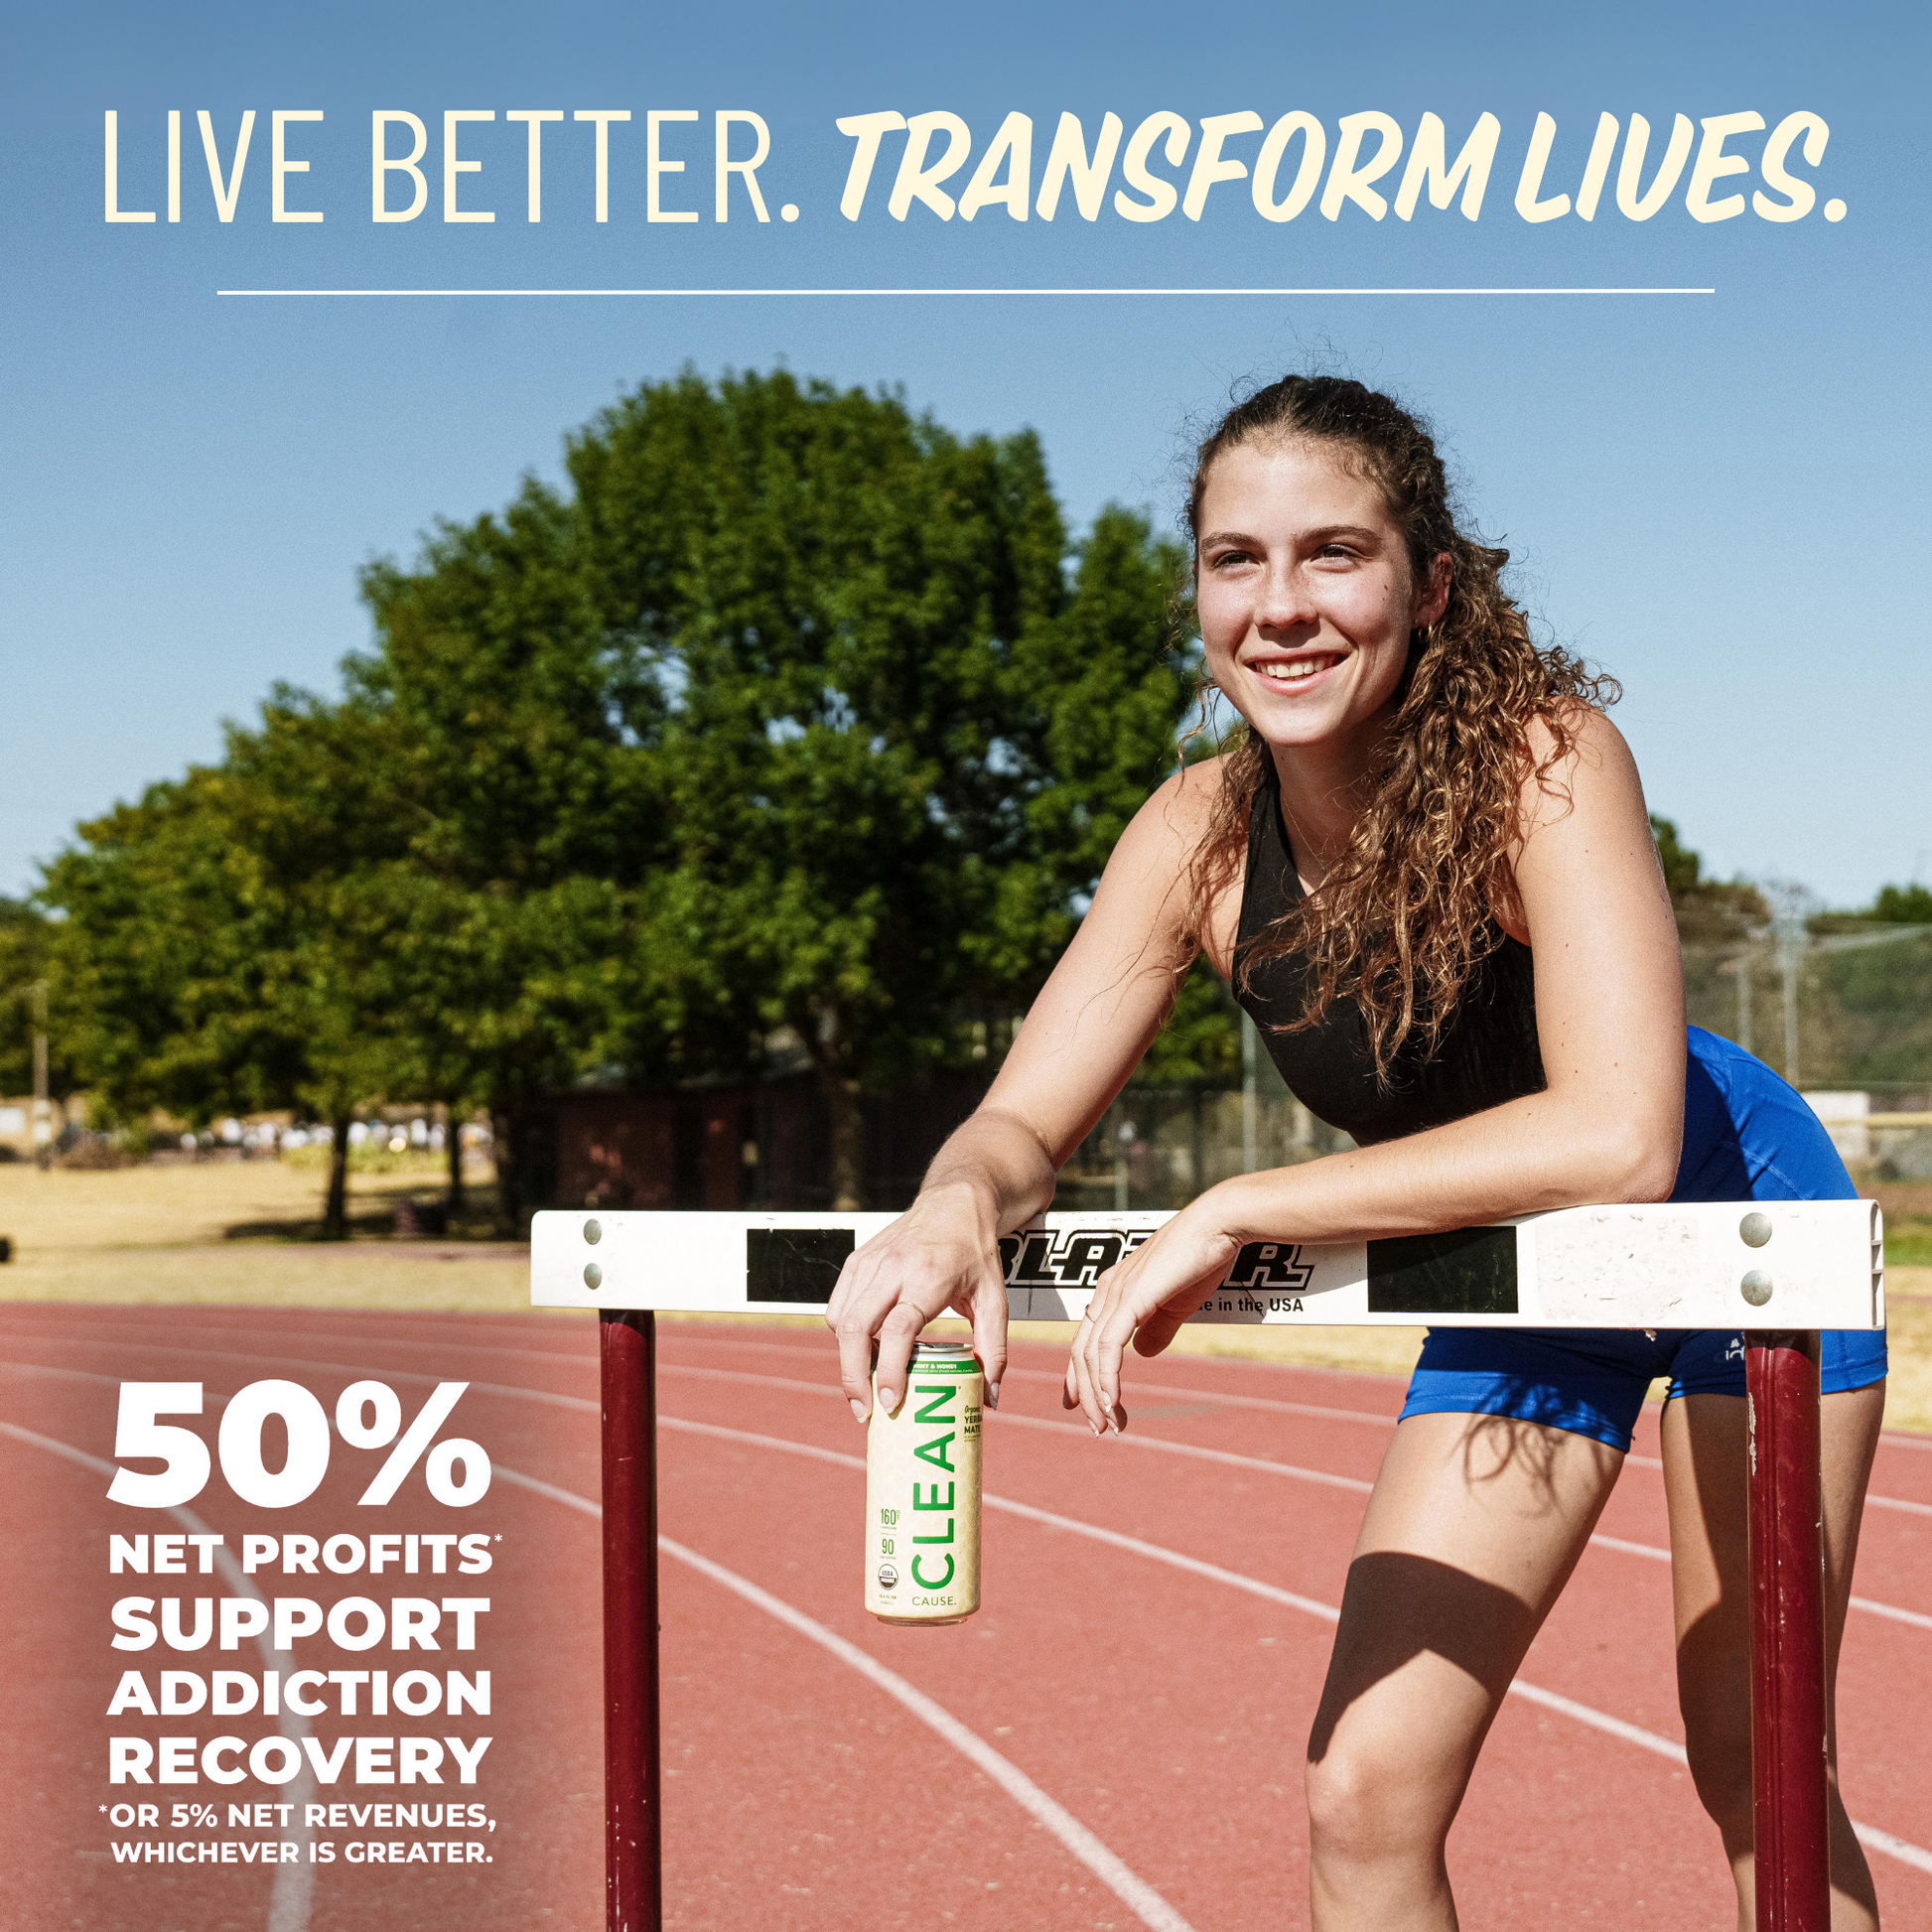 A girl leaning over a hurdle on a track with the slogan Live Better. Transform Lives. above her and 50% Net profits* support addiction recovery *or 5% net revenues, whichever is greater